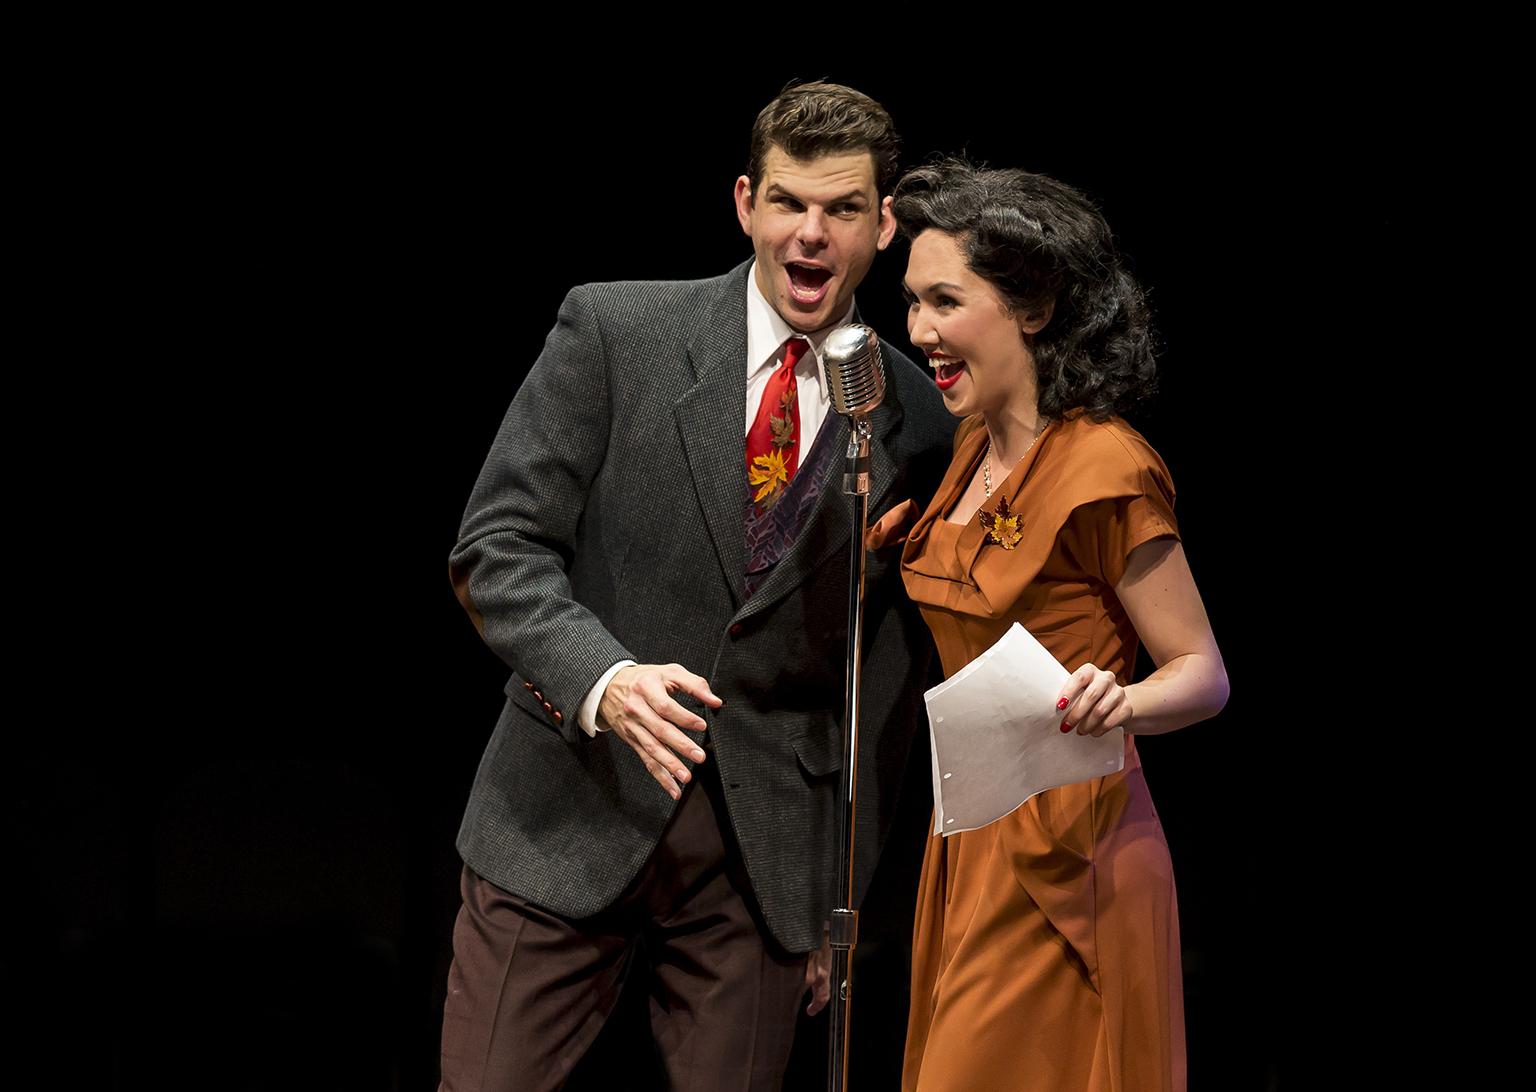 Will Burton and Kimberly Immanuel in “Holiday Inn” at the Marriott Theatre. (Courtesy of Liz Lauren)